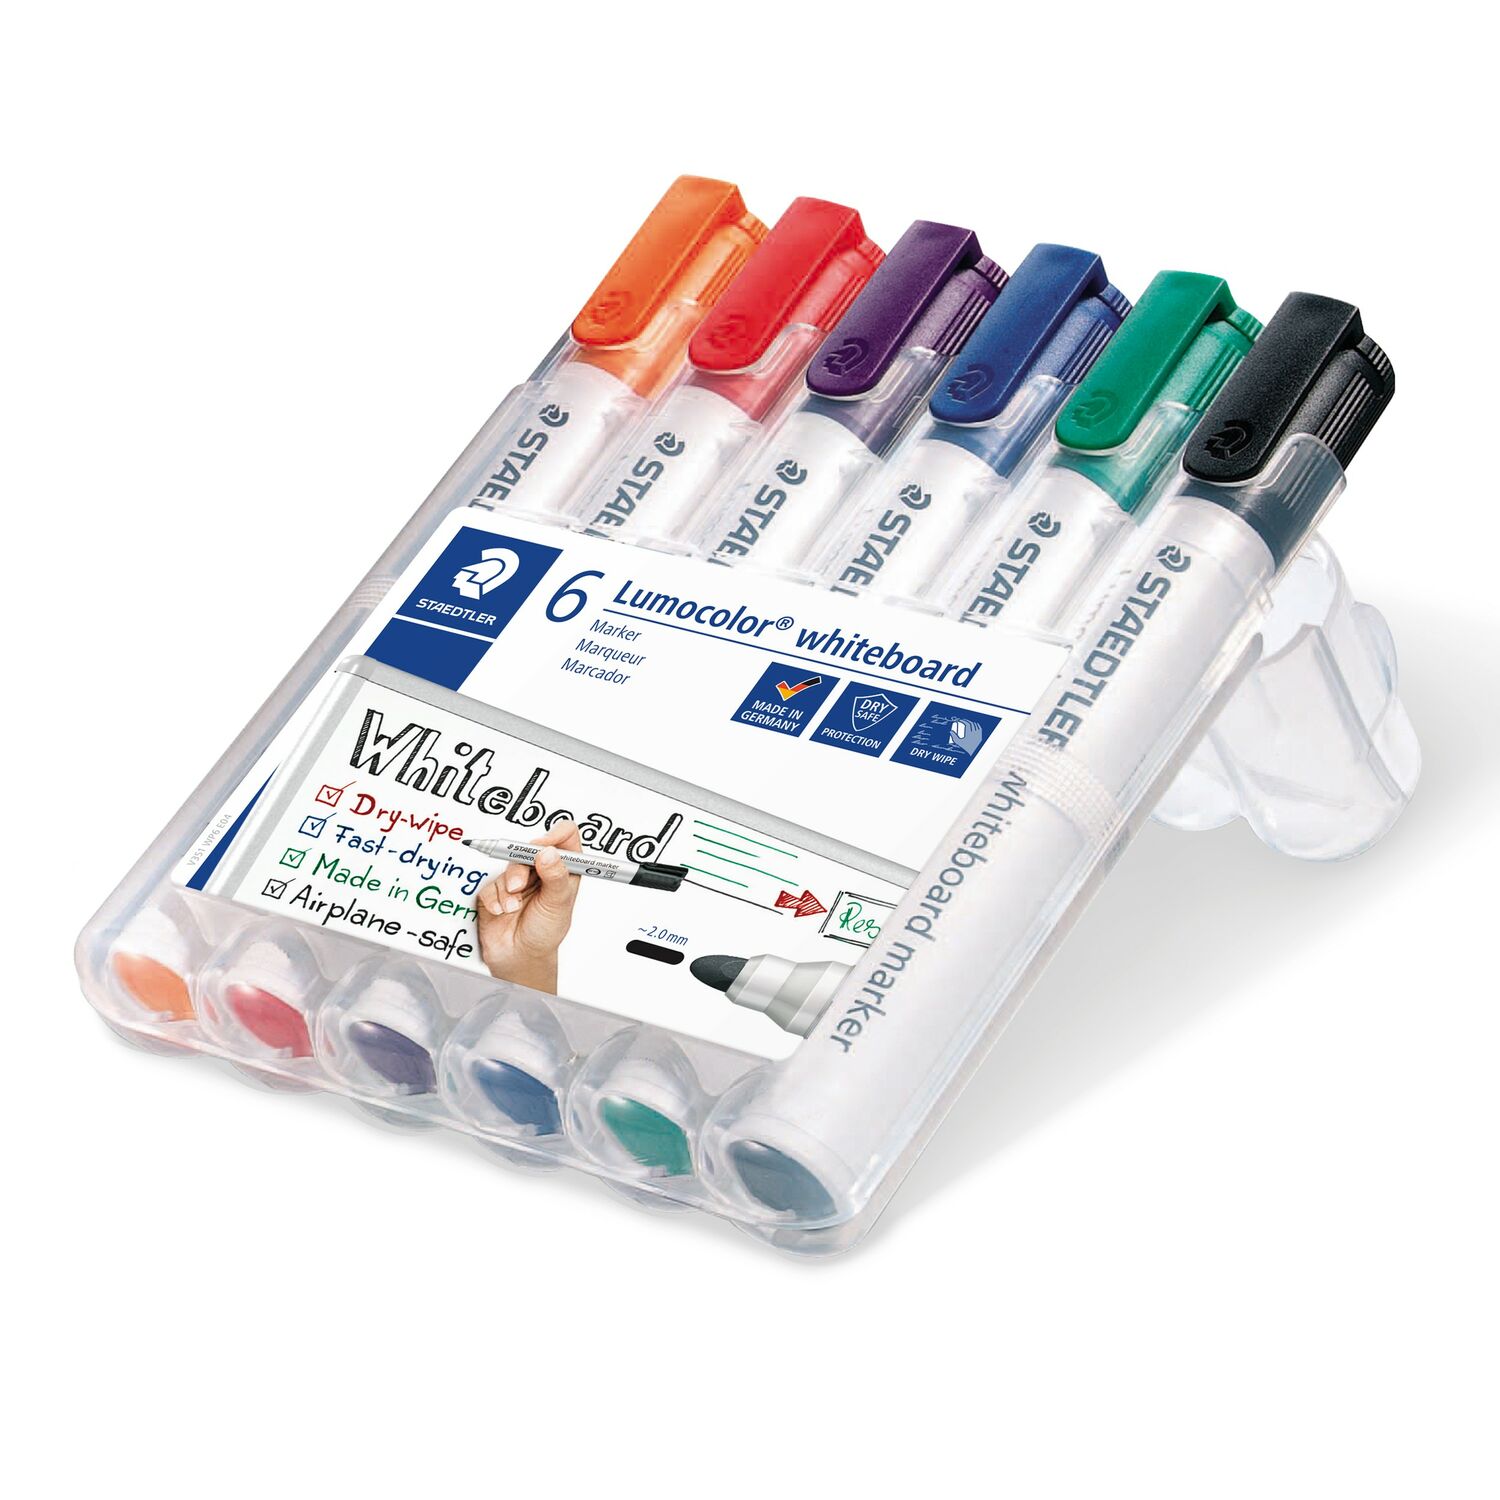 2 mm line Width Set of 6 Markers Staedtler Lumocolor 351 Whiteboard Marker Bullet Tip Approx 351 WP6X can be Wiped Dry and Residue- by whiteboards Made in Germany high Quality